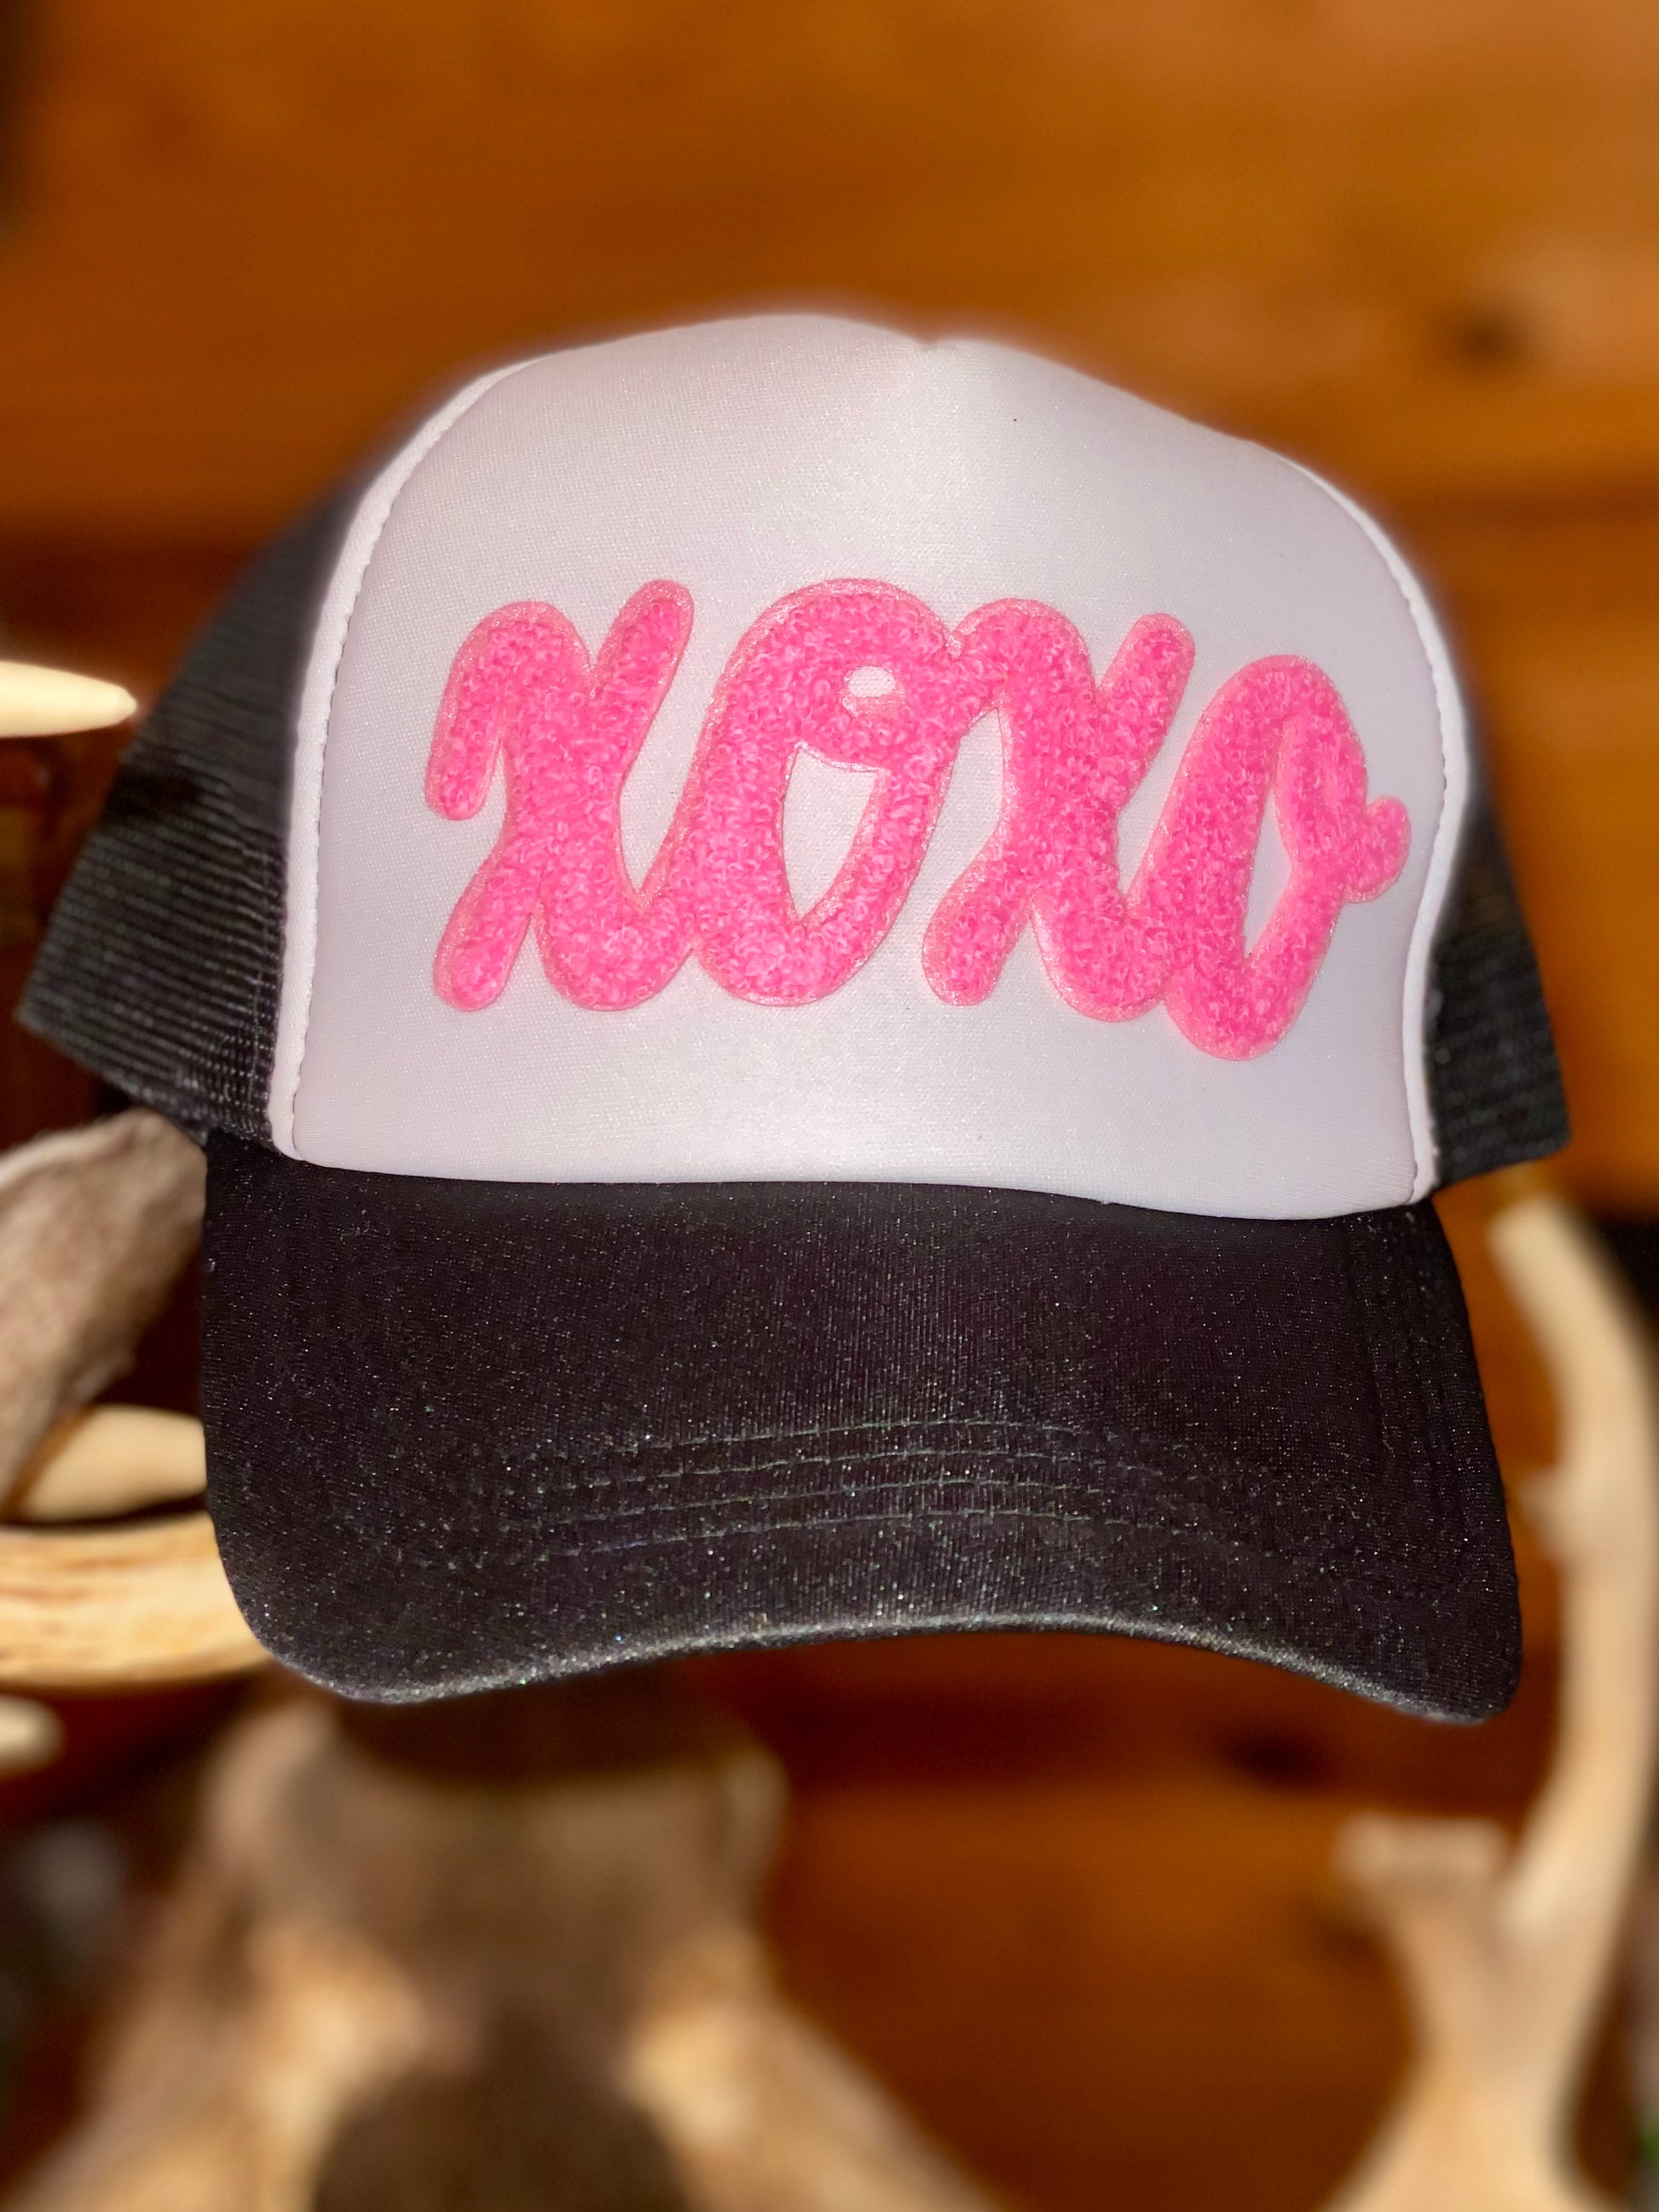 XOXO CHENILLE PATCH FOAM FRONT TRUCKER HAT - CountryFide Custom Accessories and Outdoors